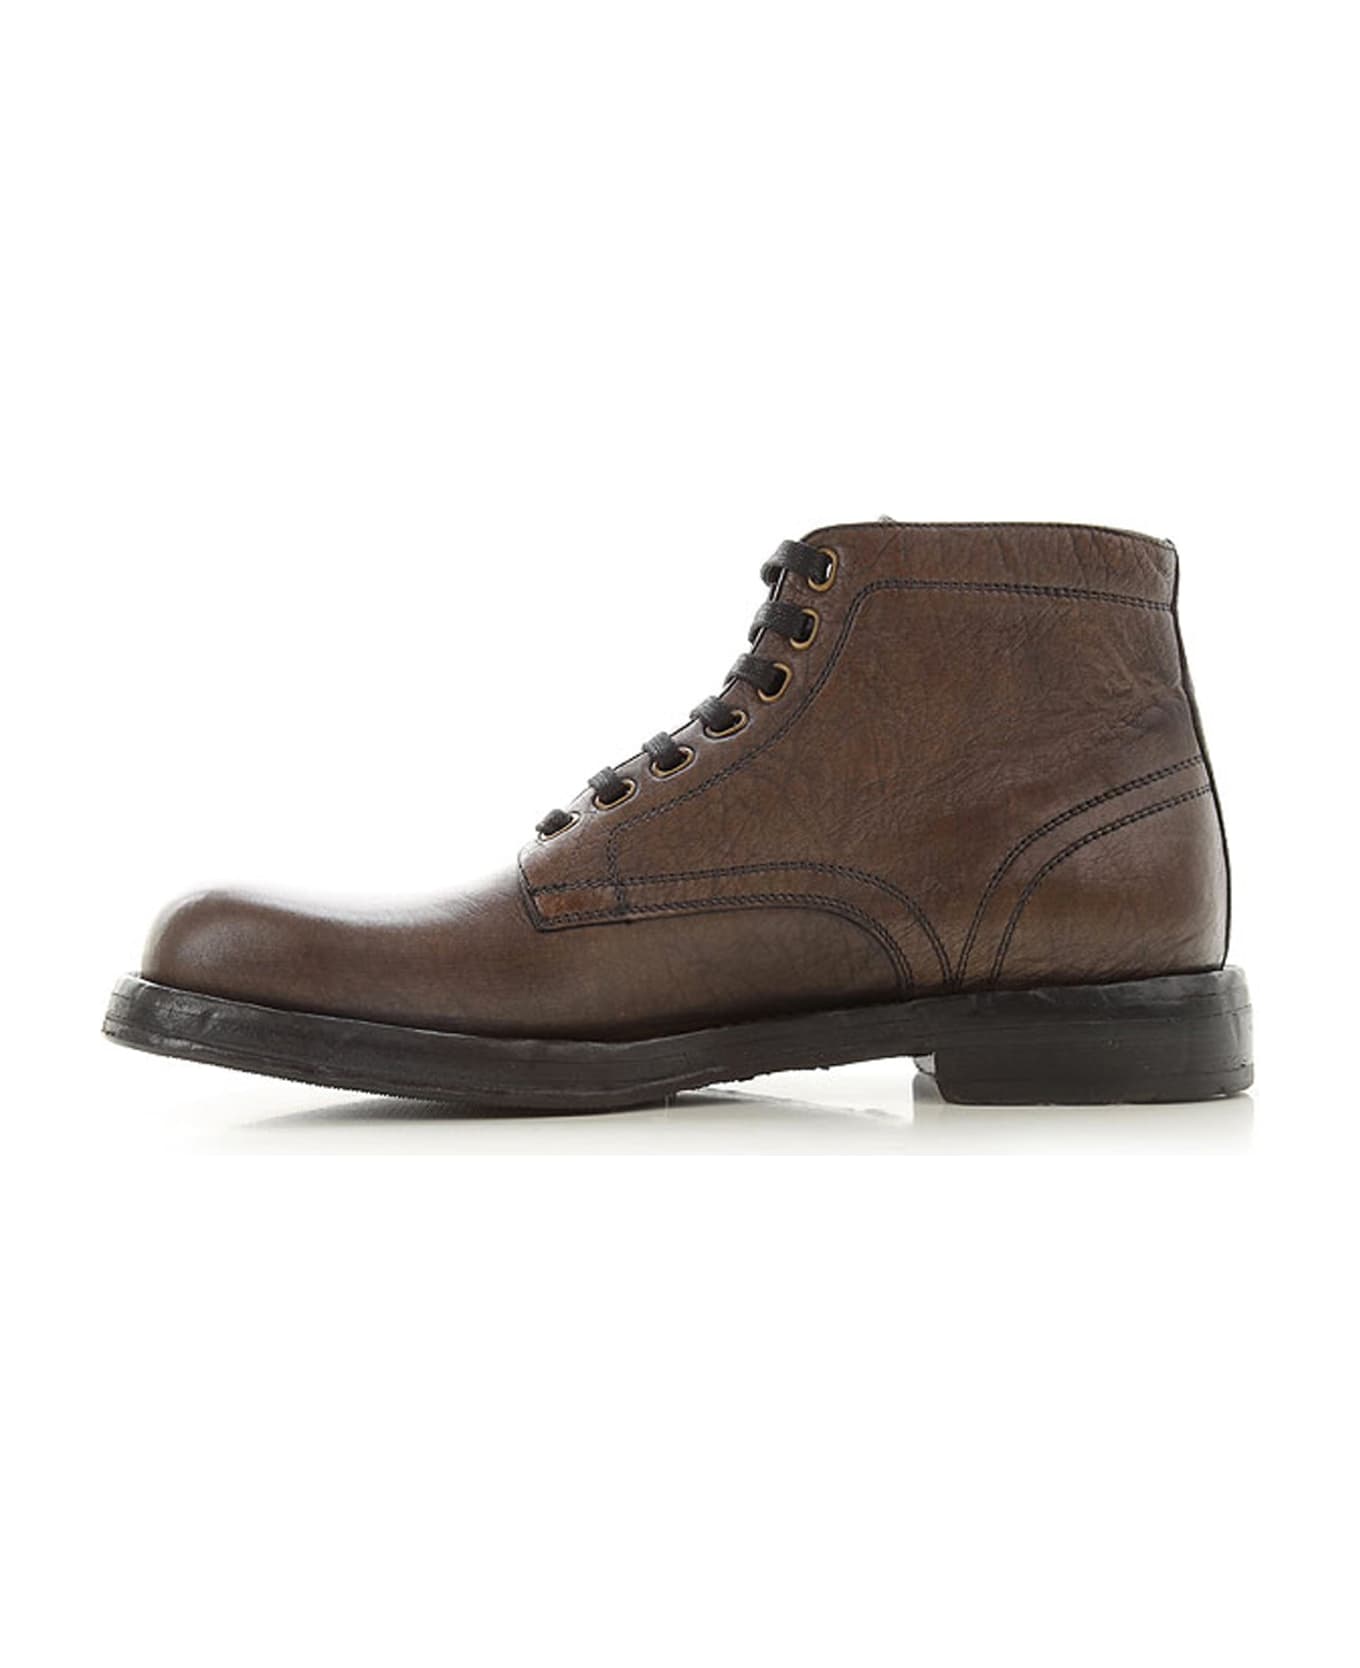 Dolce & Gabbana Leather Ankle Boots - Brown ブーツ